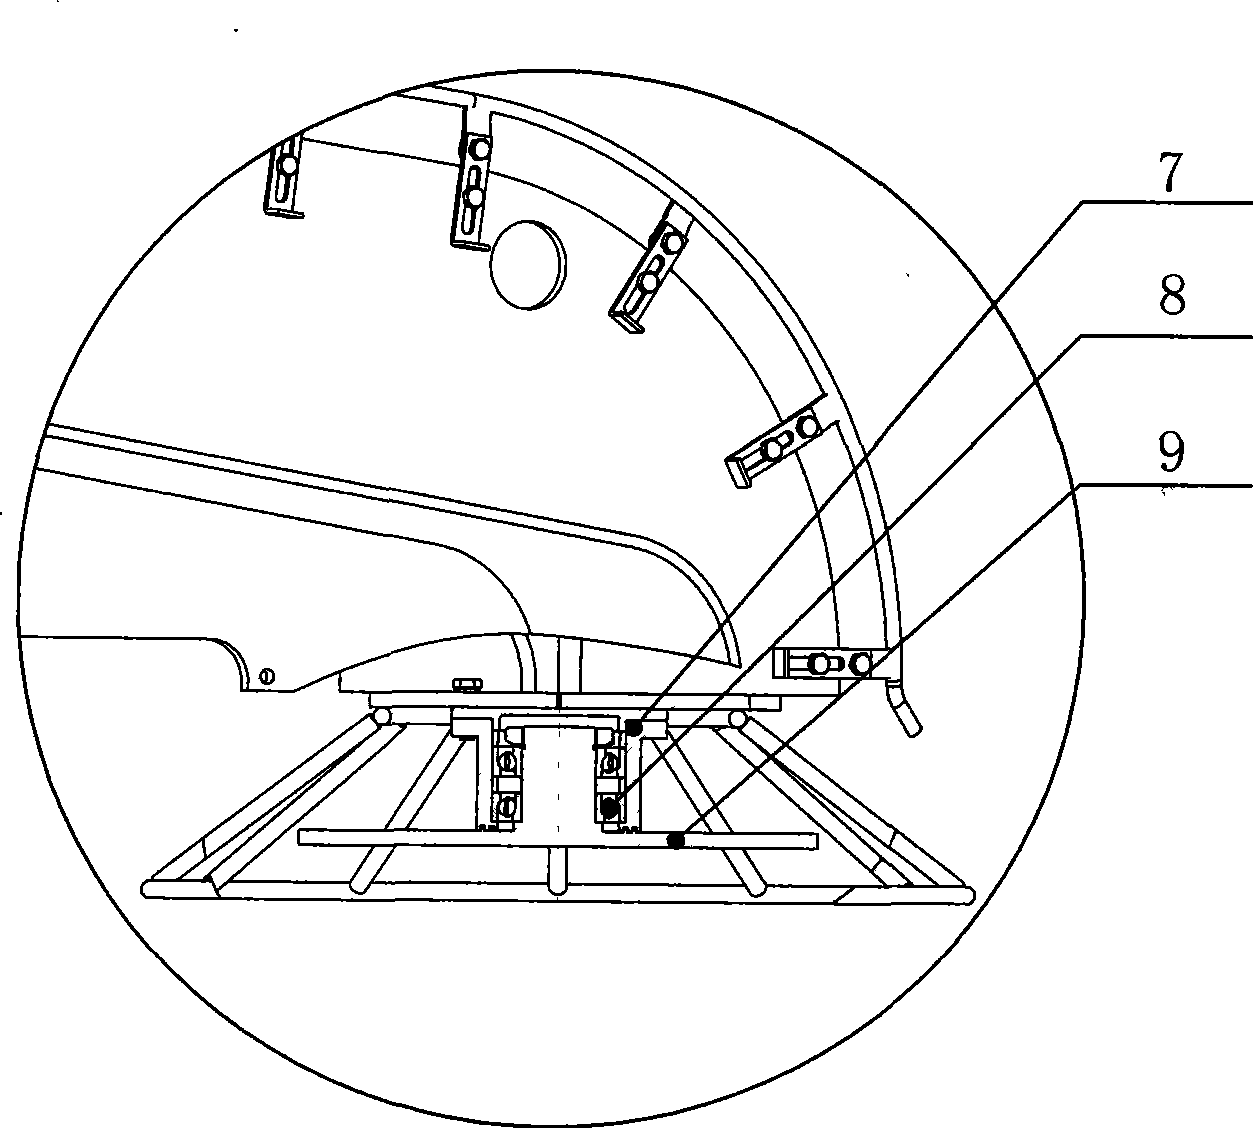 Quincunx wire unloading device